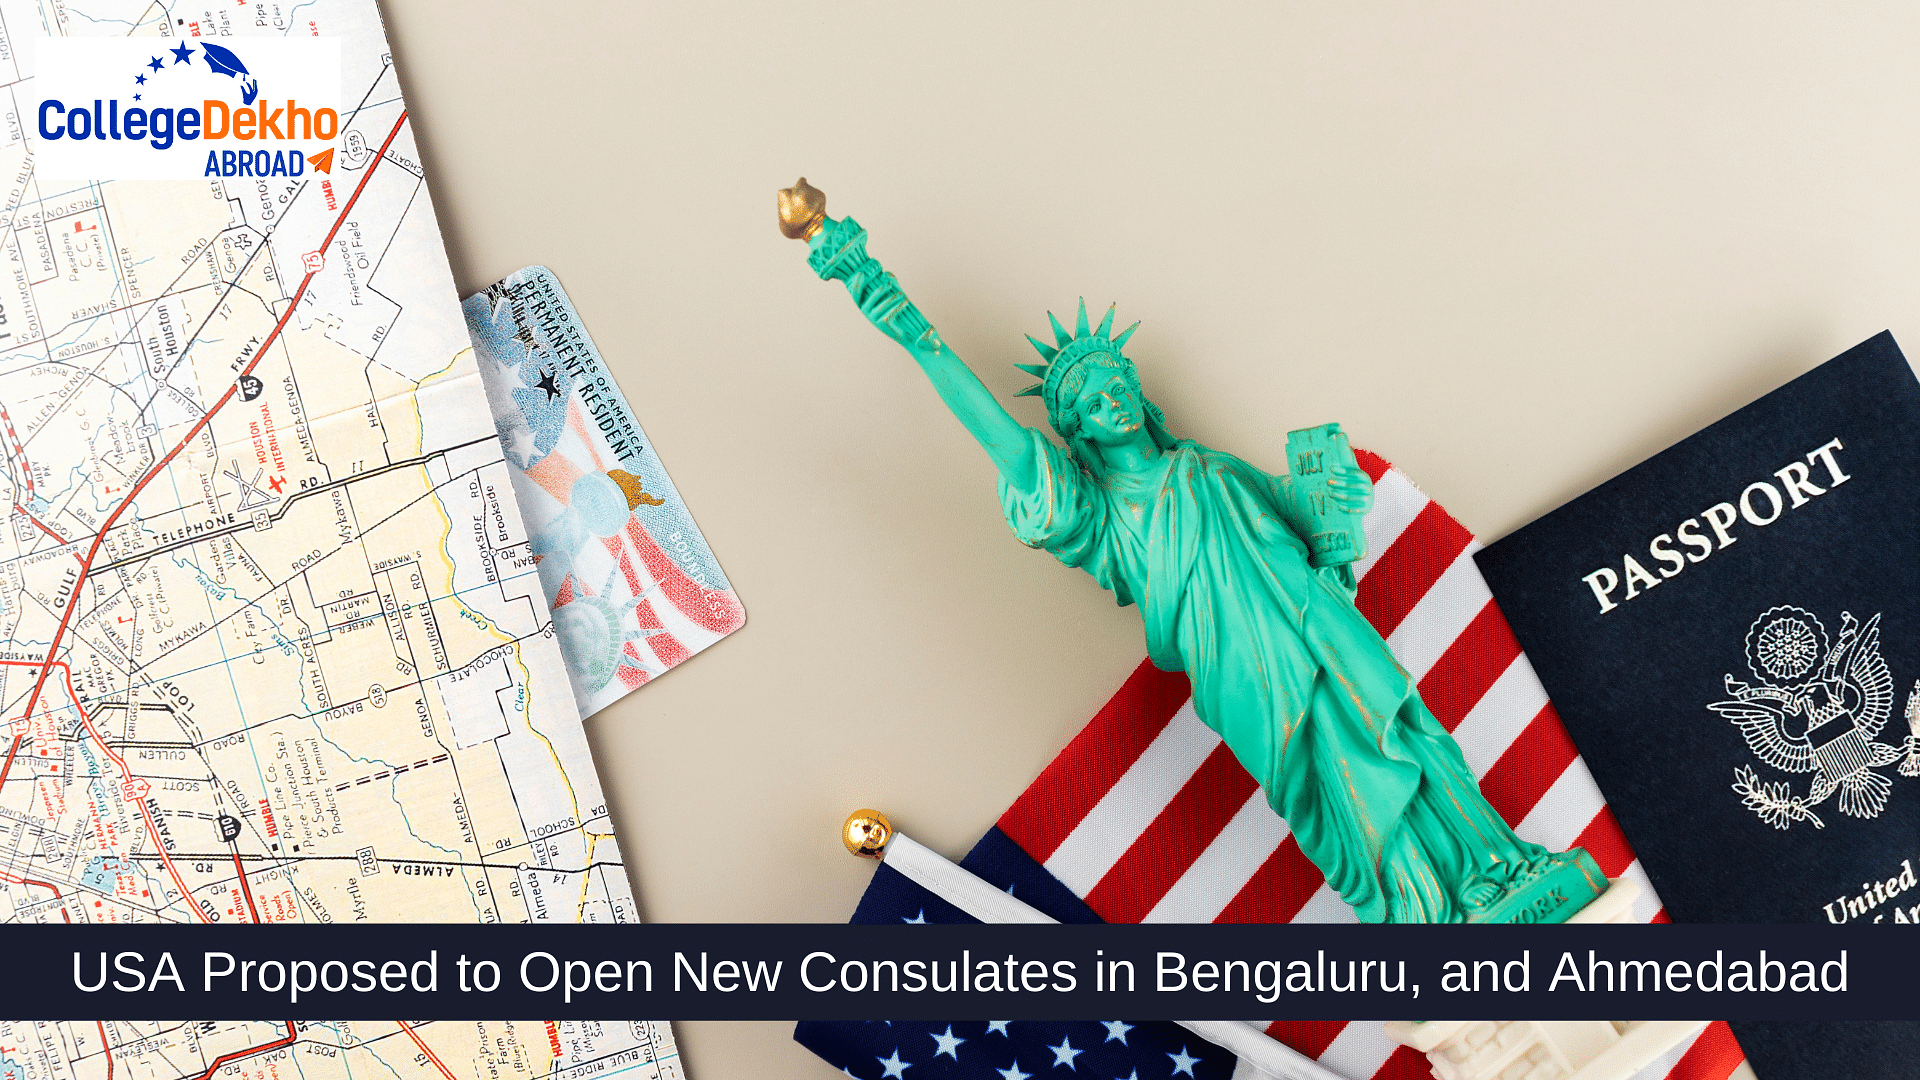 USA Proposed to Open Consulates in Bengaluru, and Ahmedabad